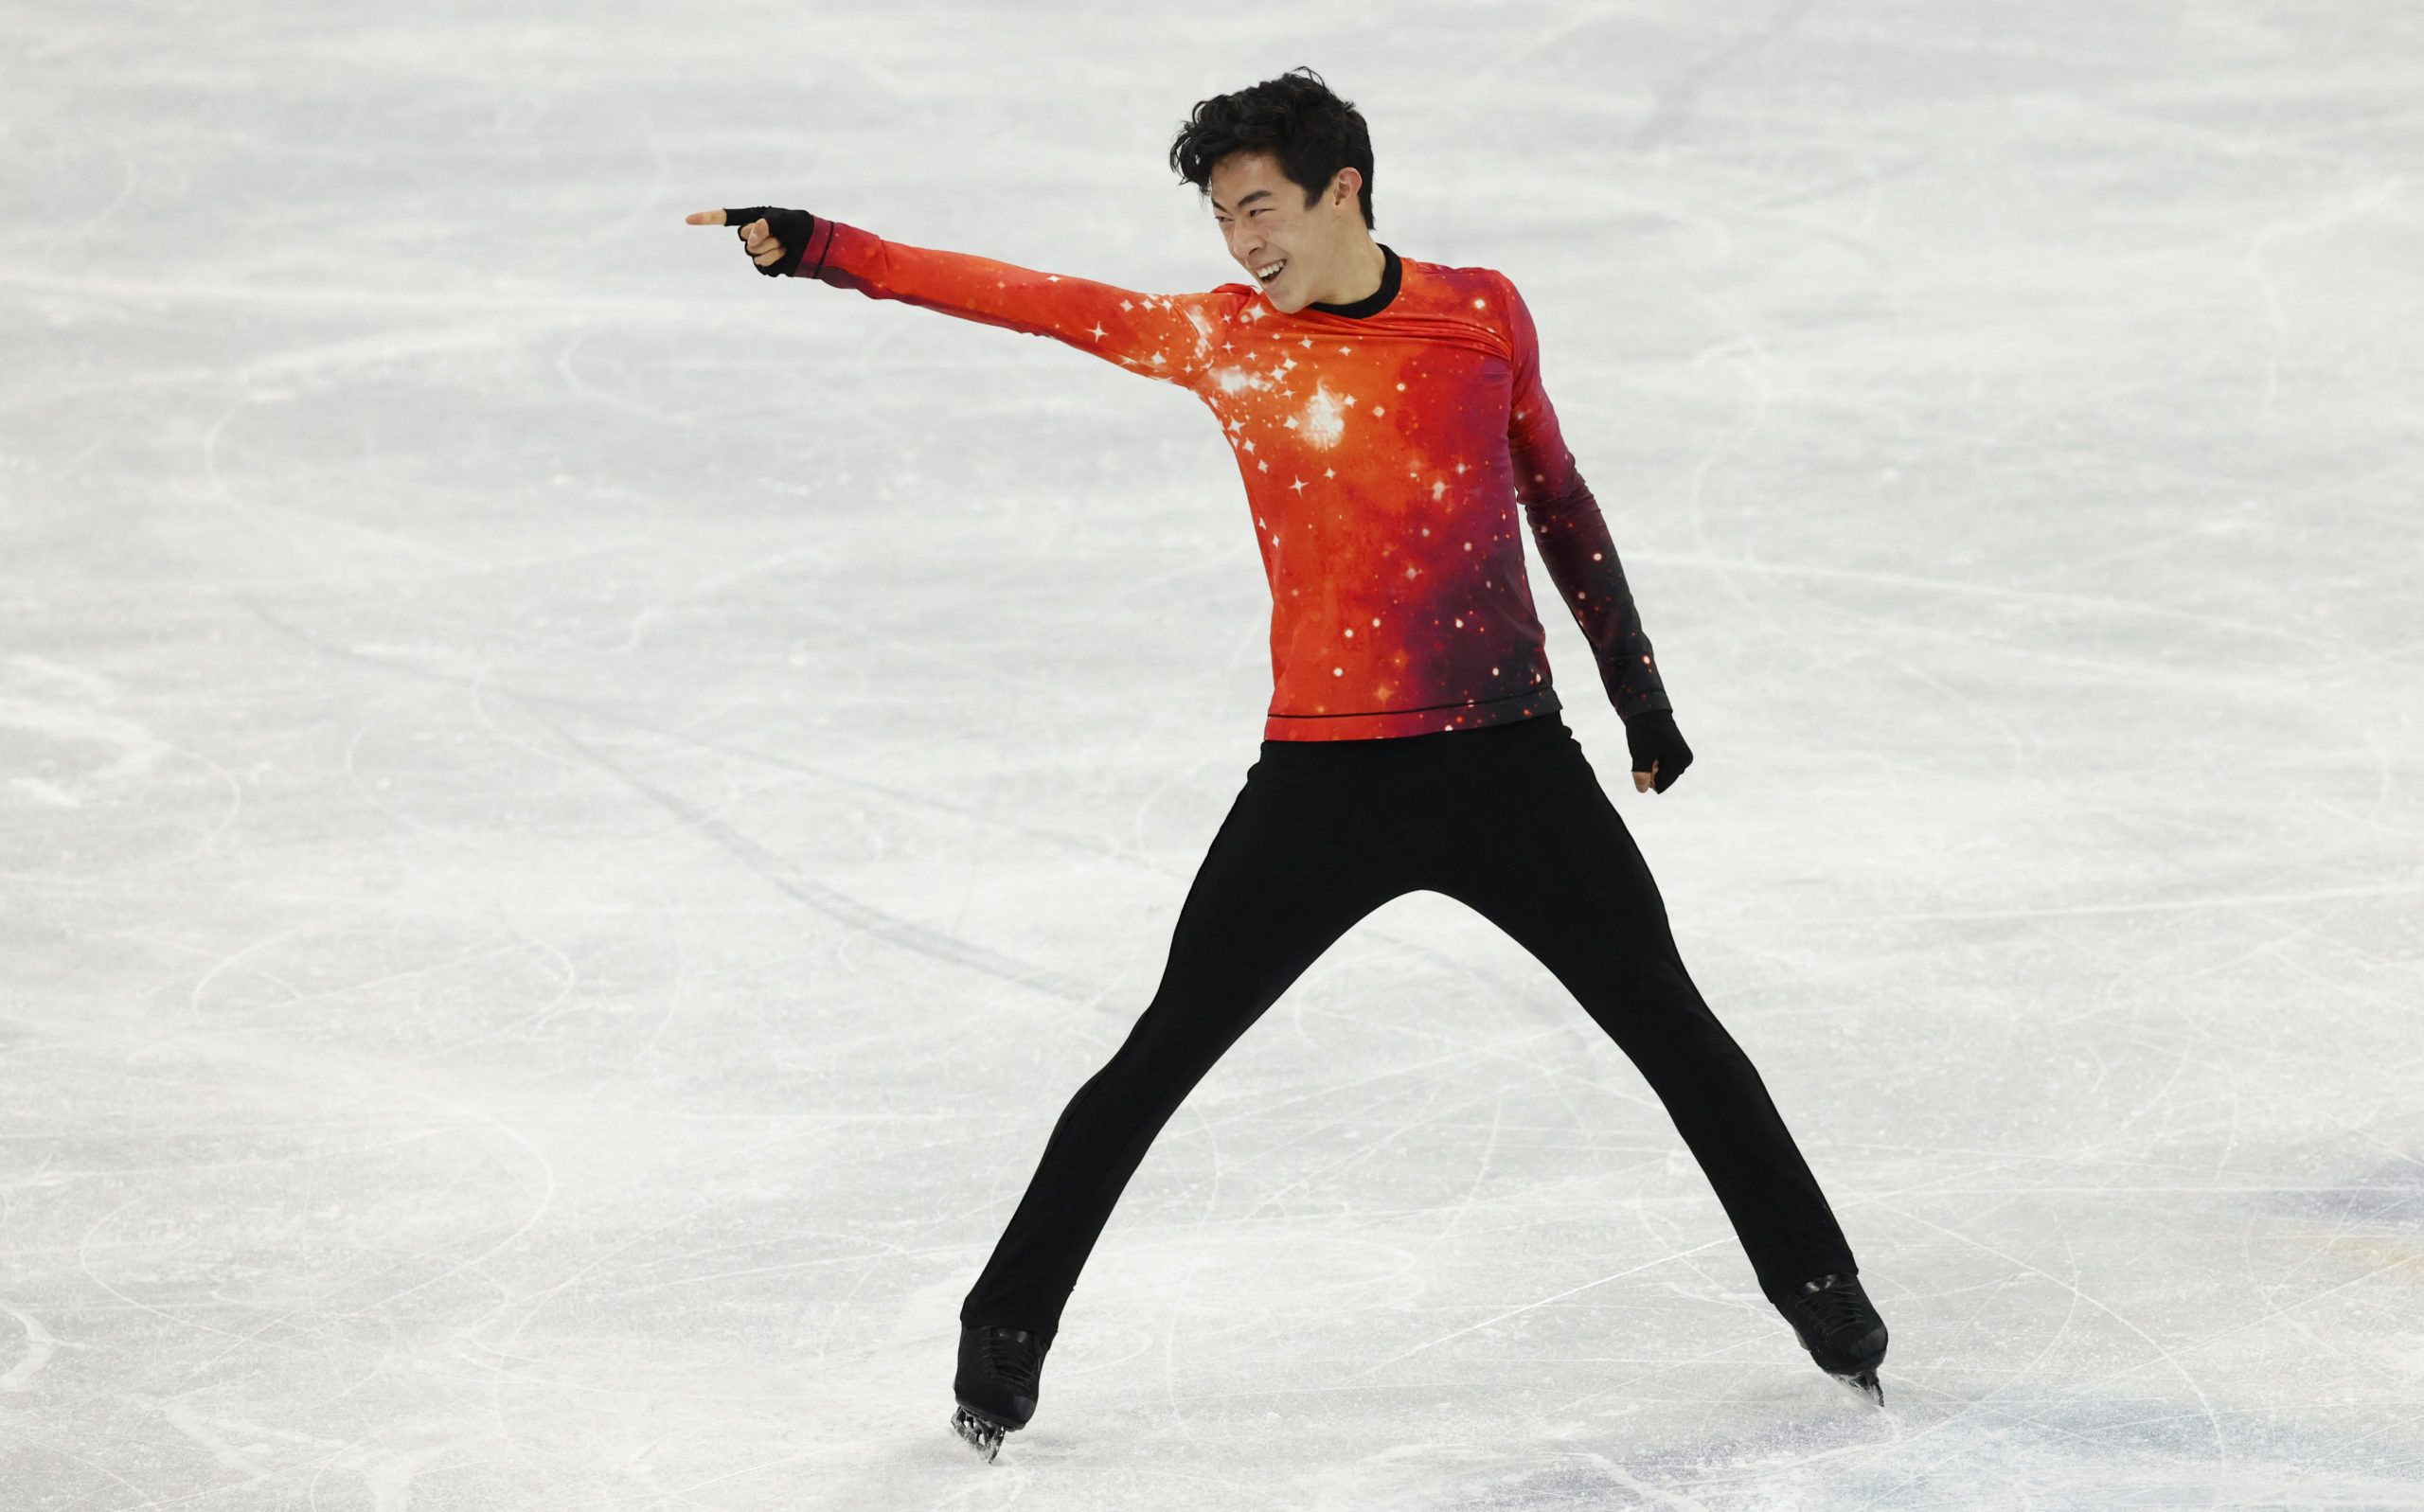 2022 Beijing Olympics - Figure Skating - Men Single Skating - Free Skating - Capital Indoor Stadium, Beijing, China - February 10, 2022. Nathan Chen of the United States in action. 